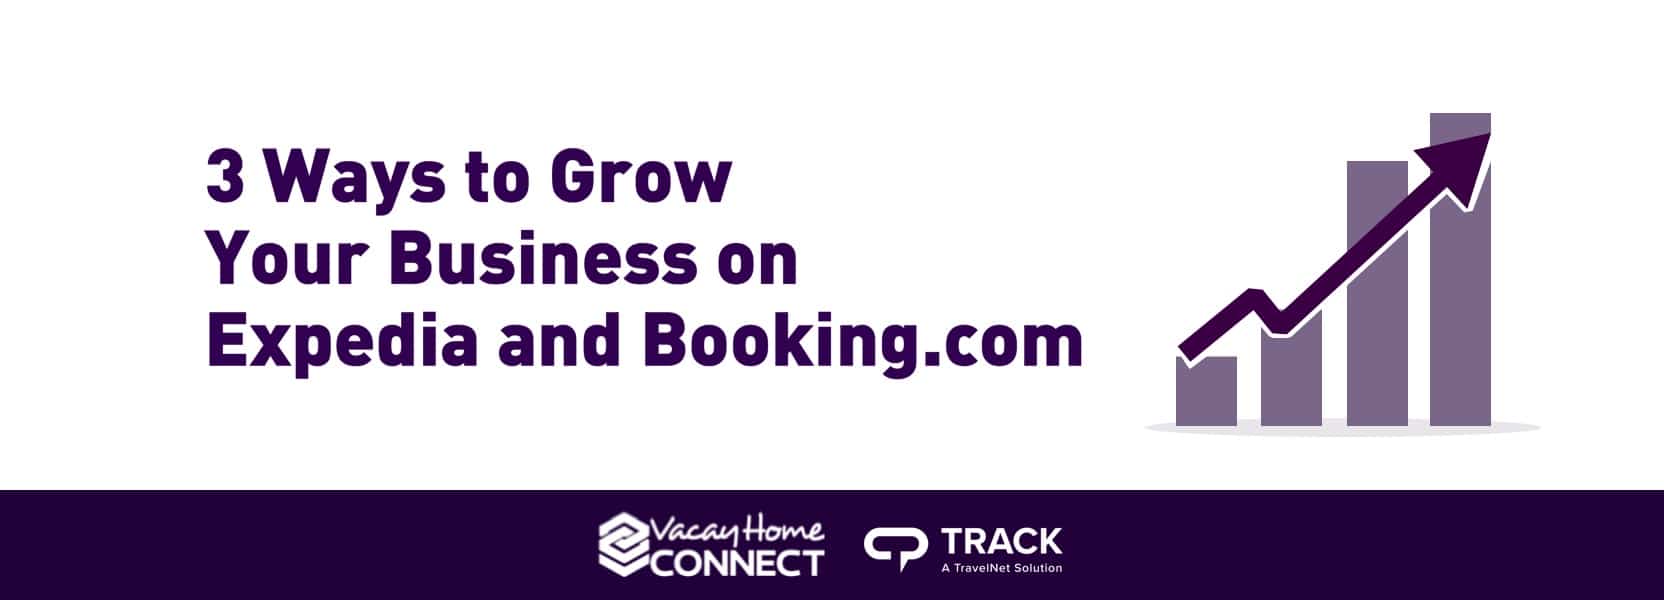 3 Ways to Grow Your Business on Expedia and Booking.com